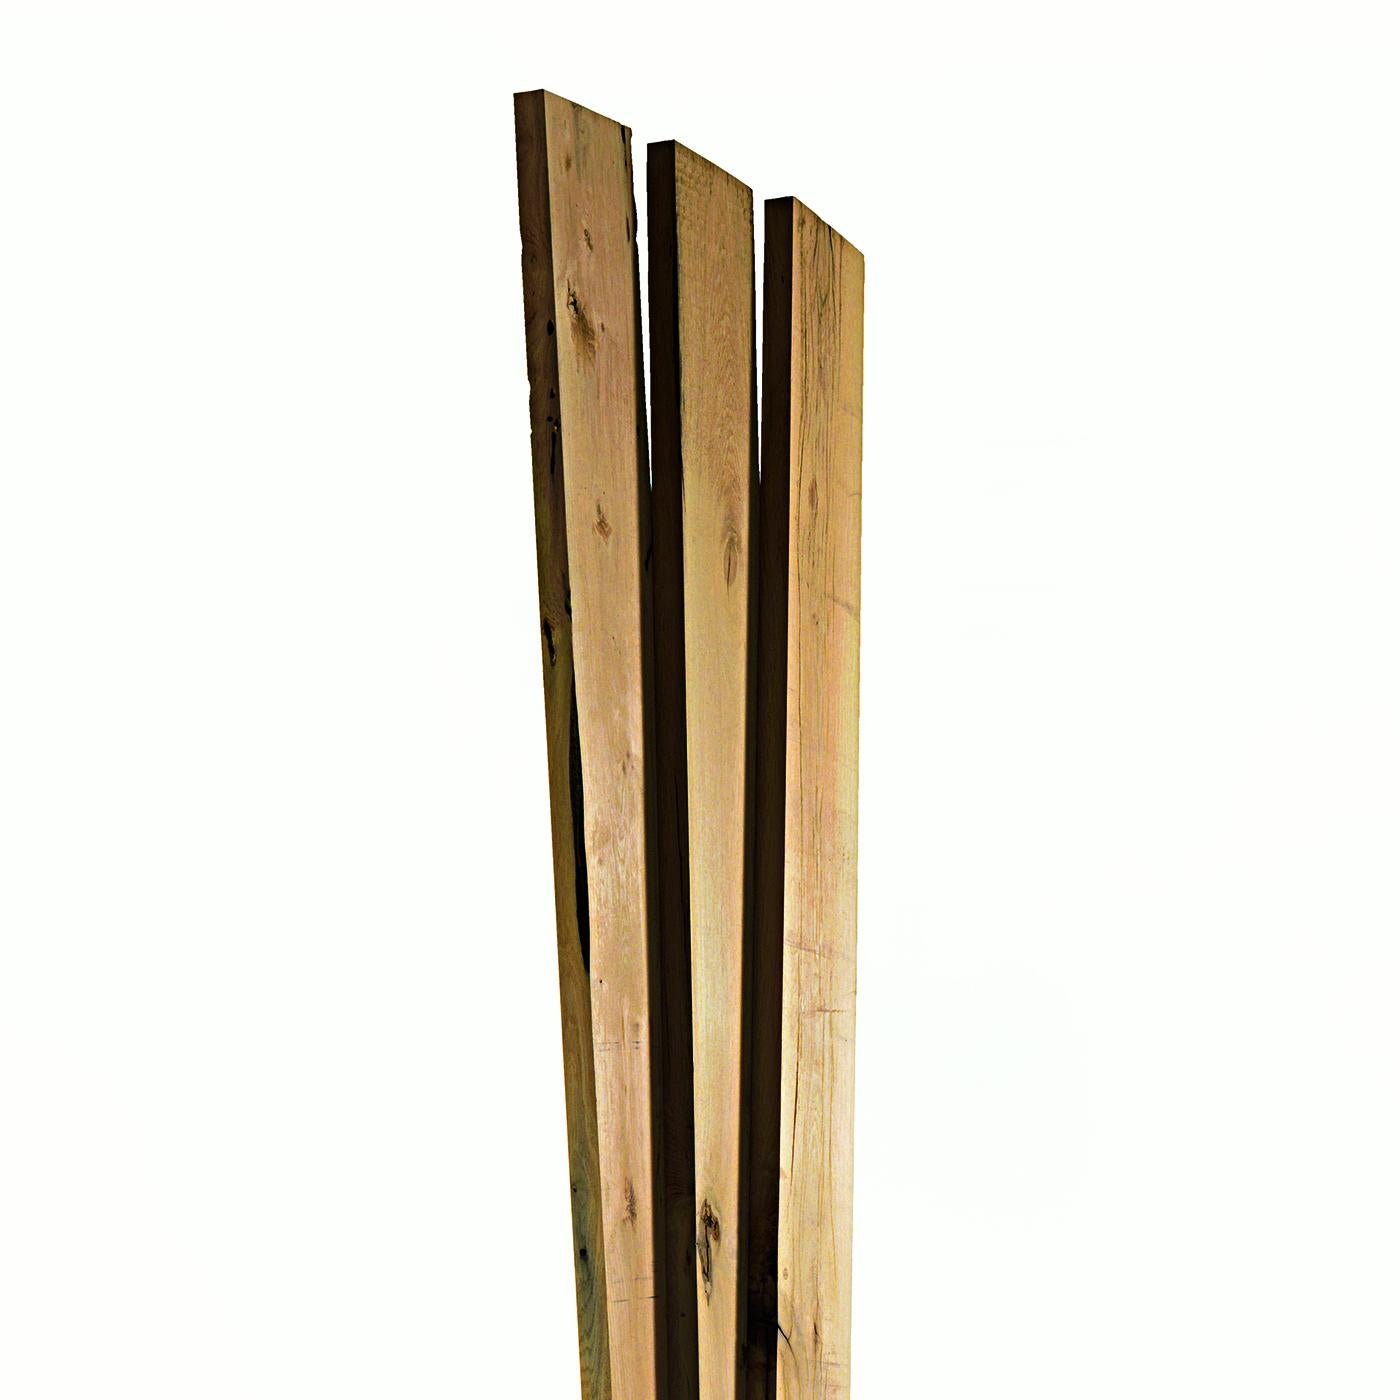 Sculpture fan raw oak all in solid raw oak
from Venice canals columns. With iron base.